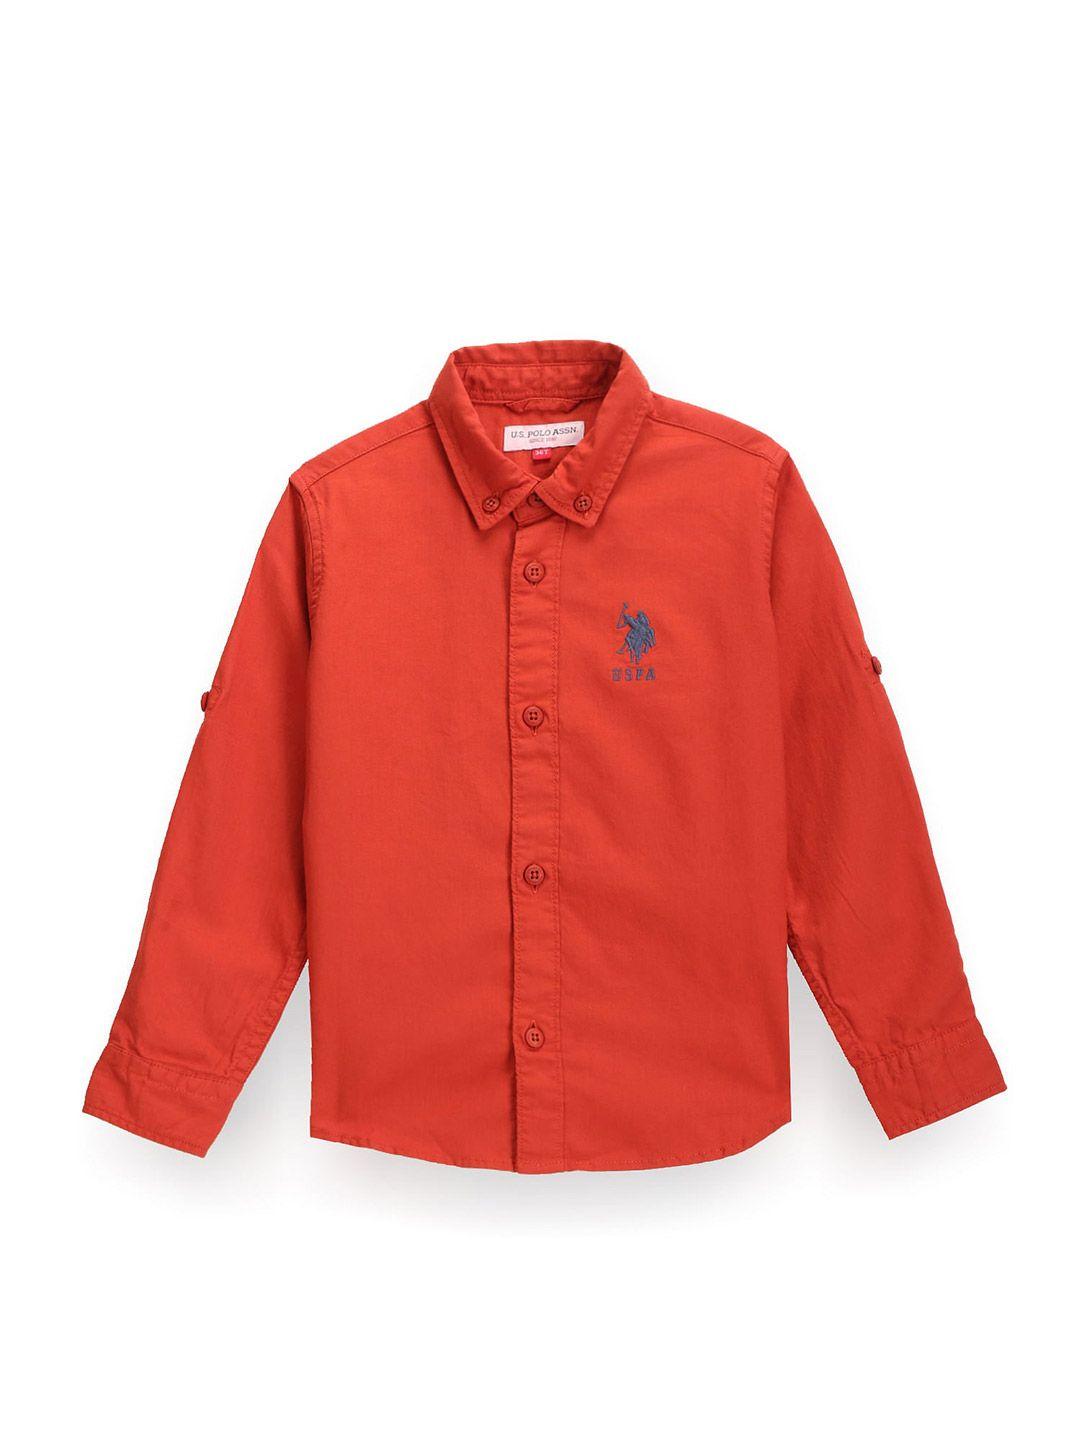 u.s. polo assn. kids boys classic brand embroidered long sleeves cotton casual shirt